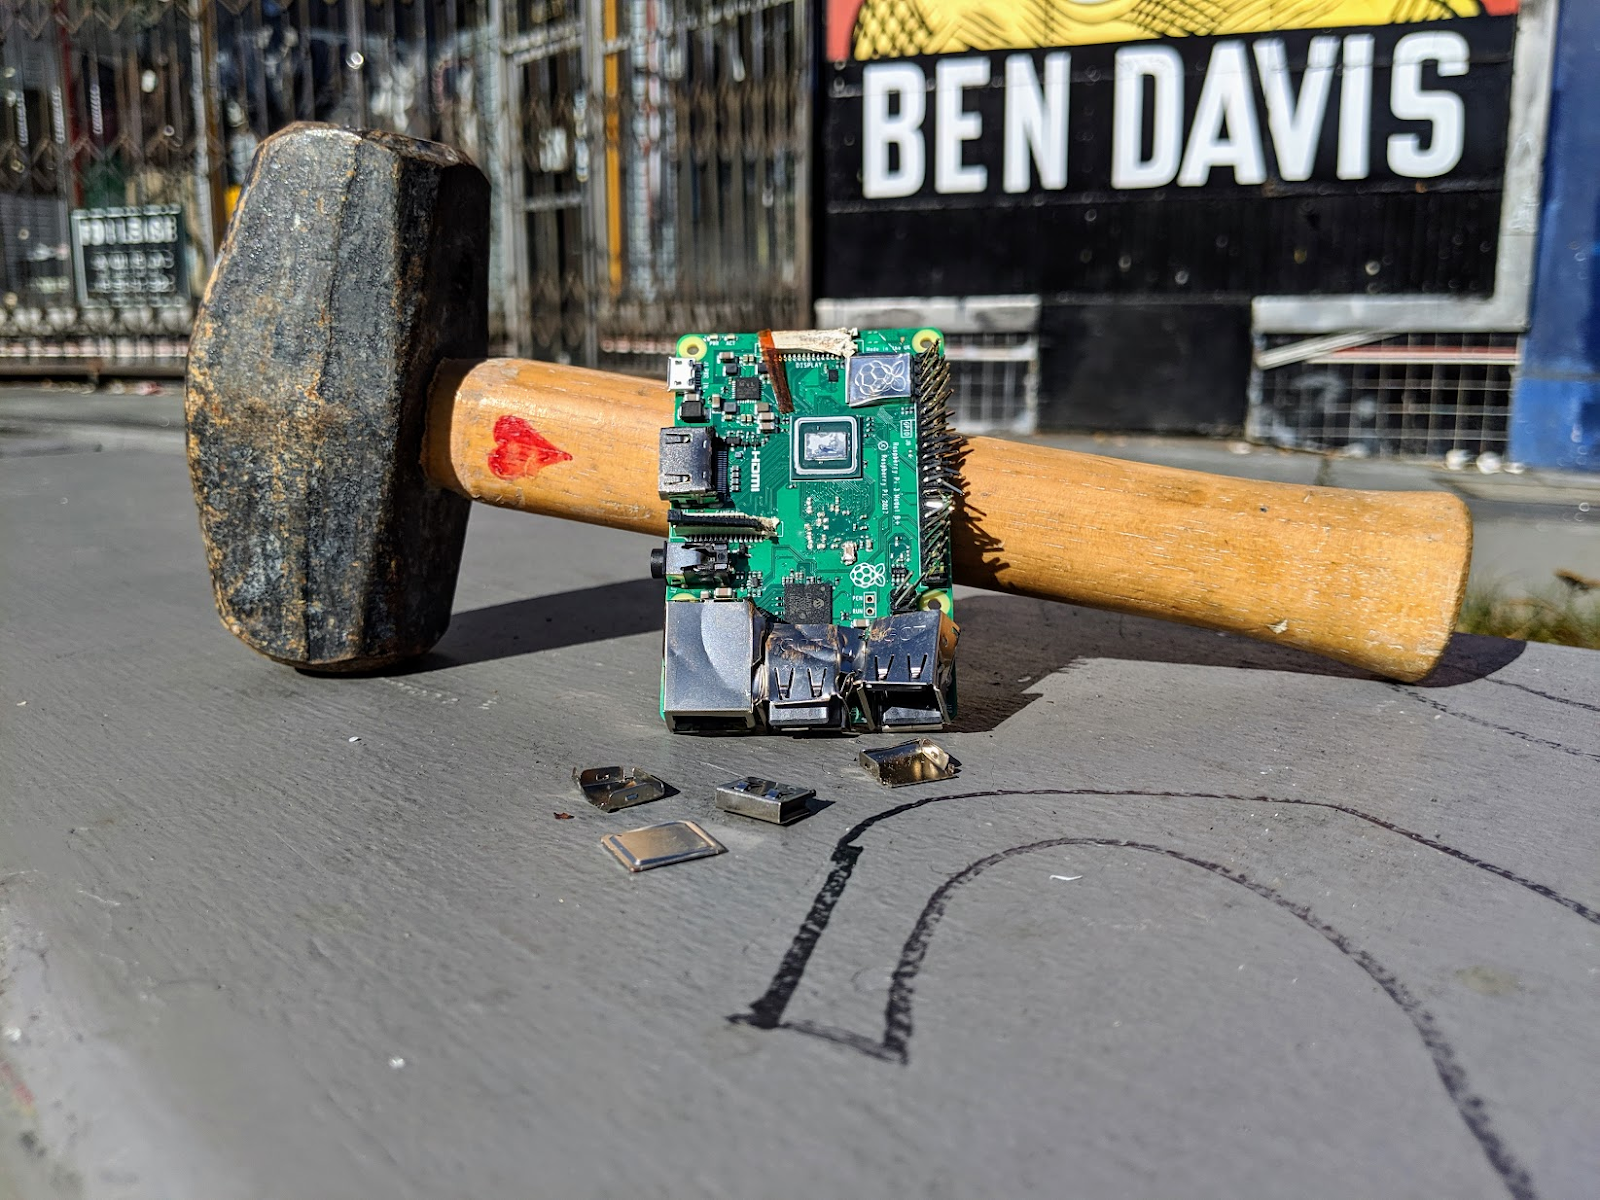 A smashed up Raspberry Pi sits propped against a mallet, on top of a concrete barrier. The mallet has a small heart drawn on it.